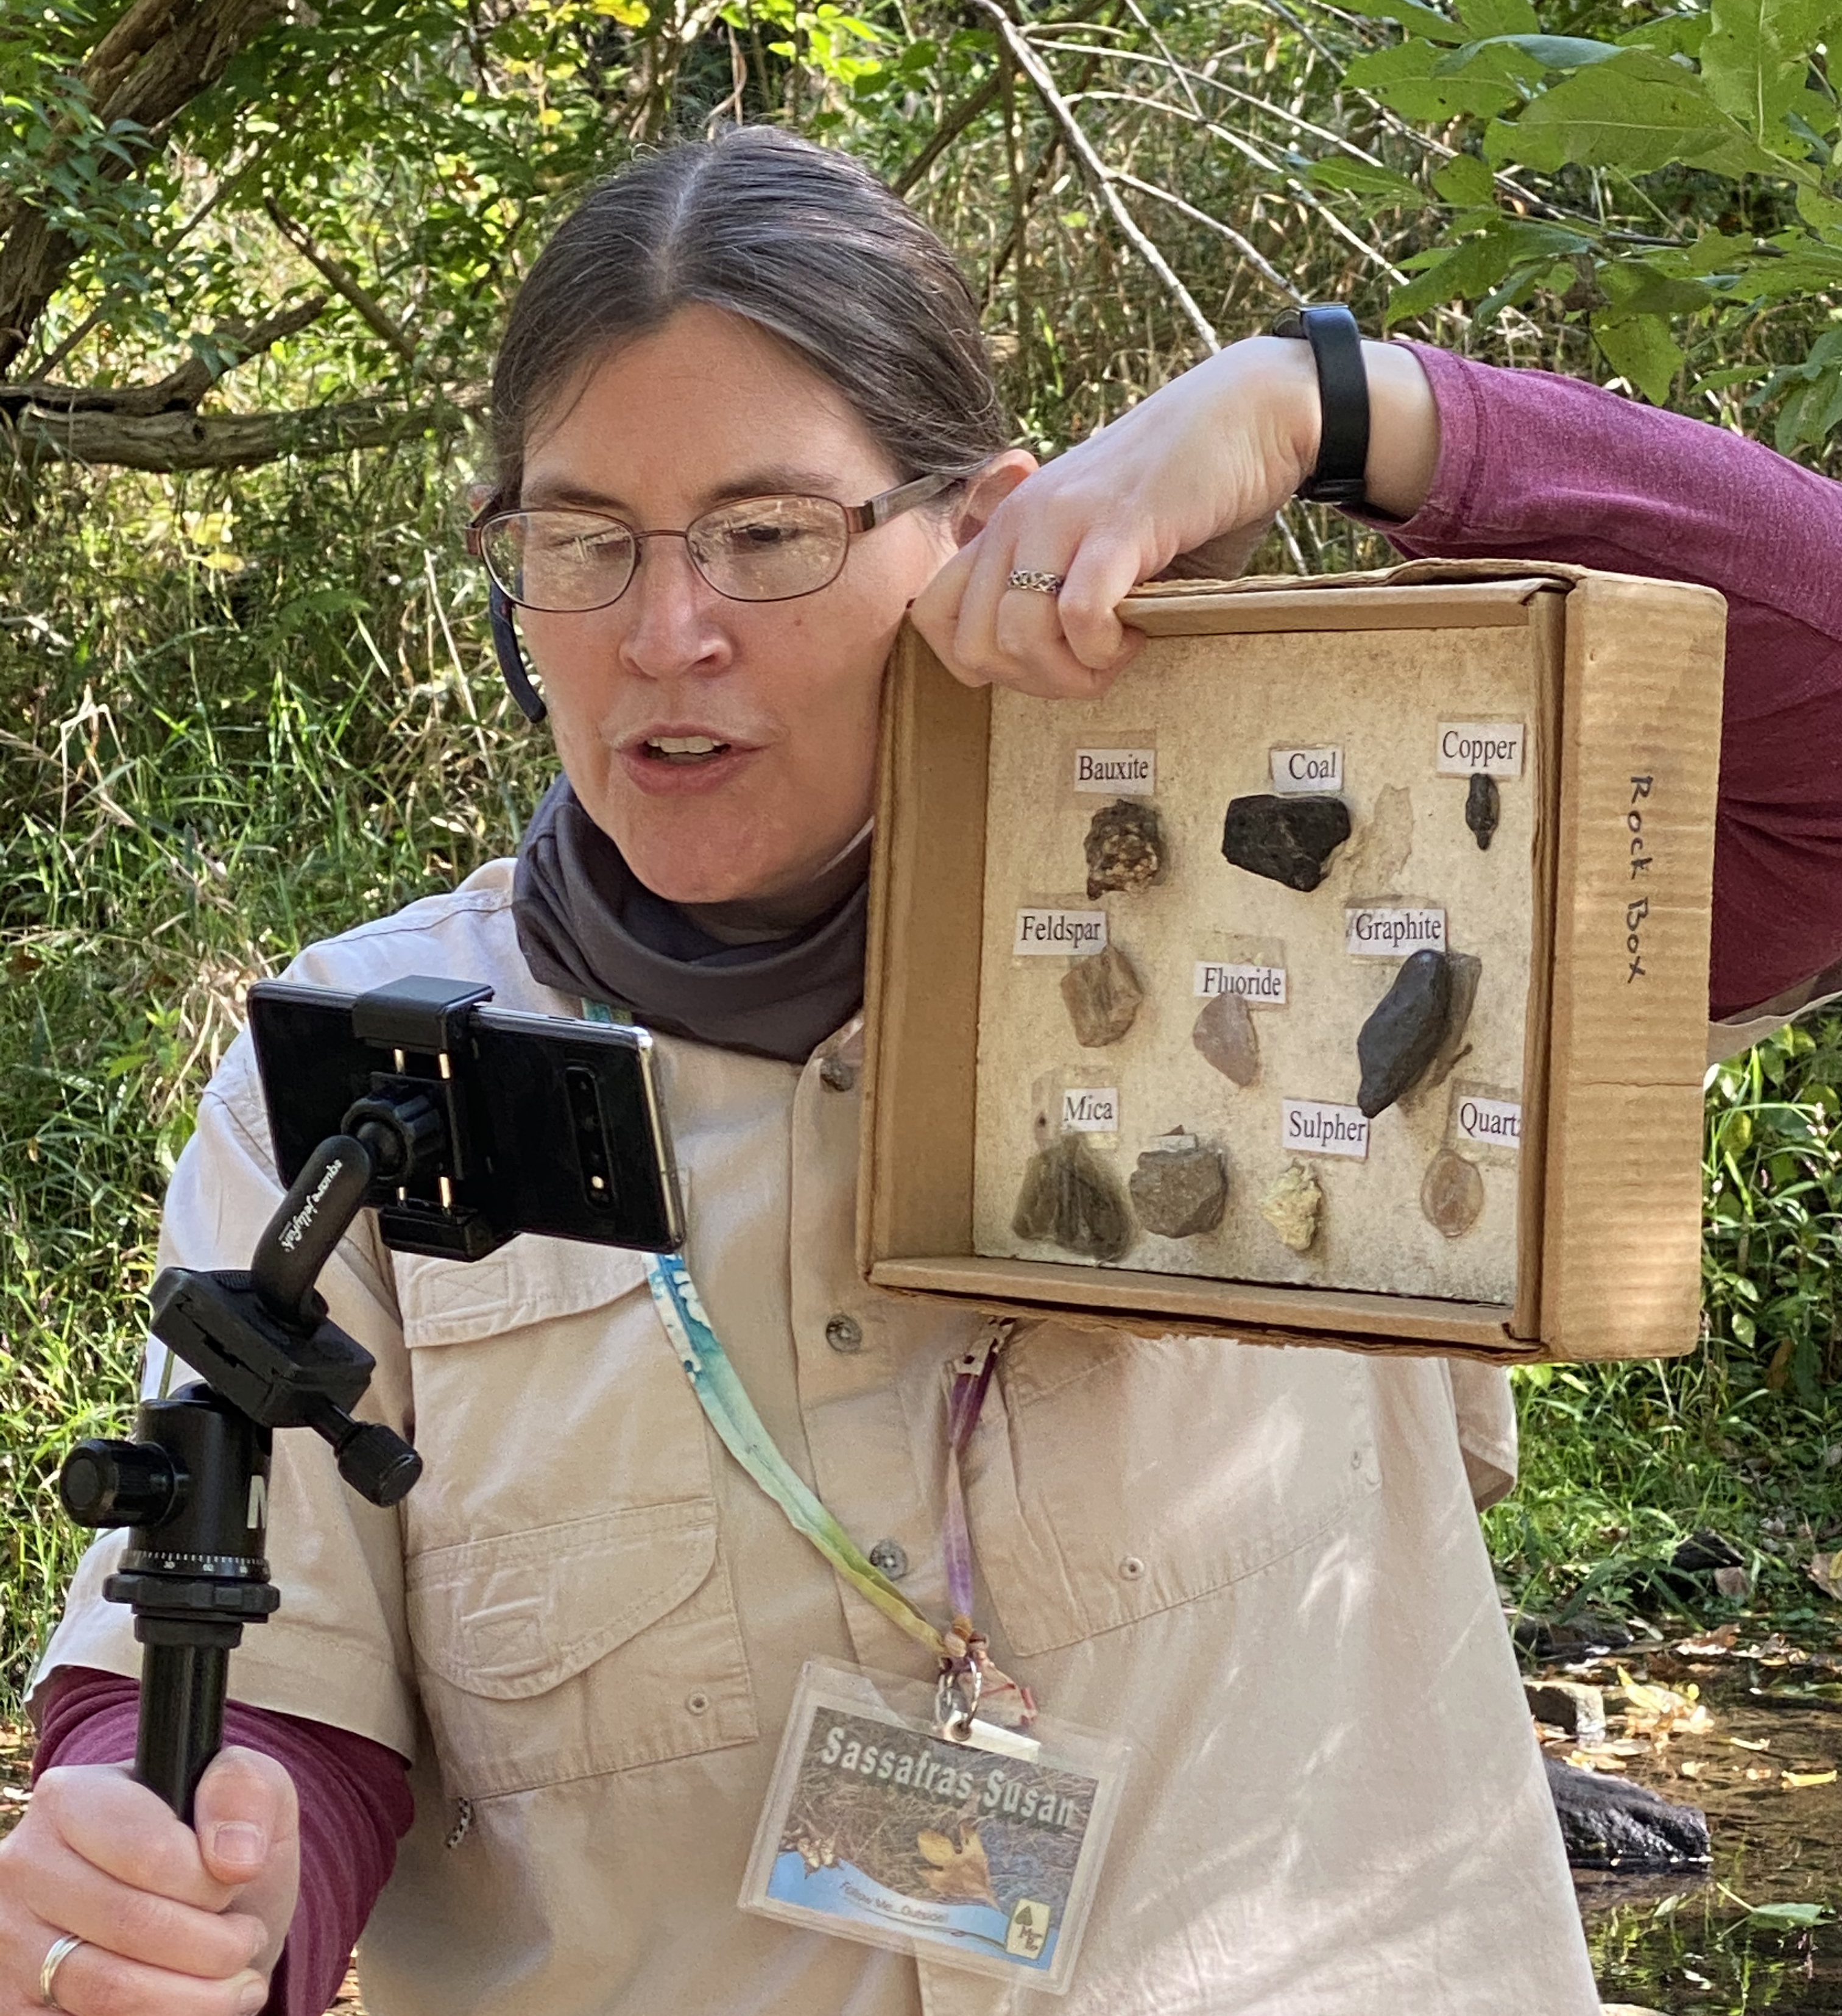 Naturalist showing a box of labeled rocks